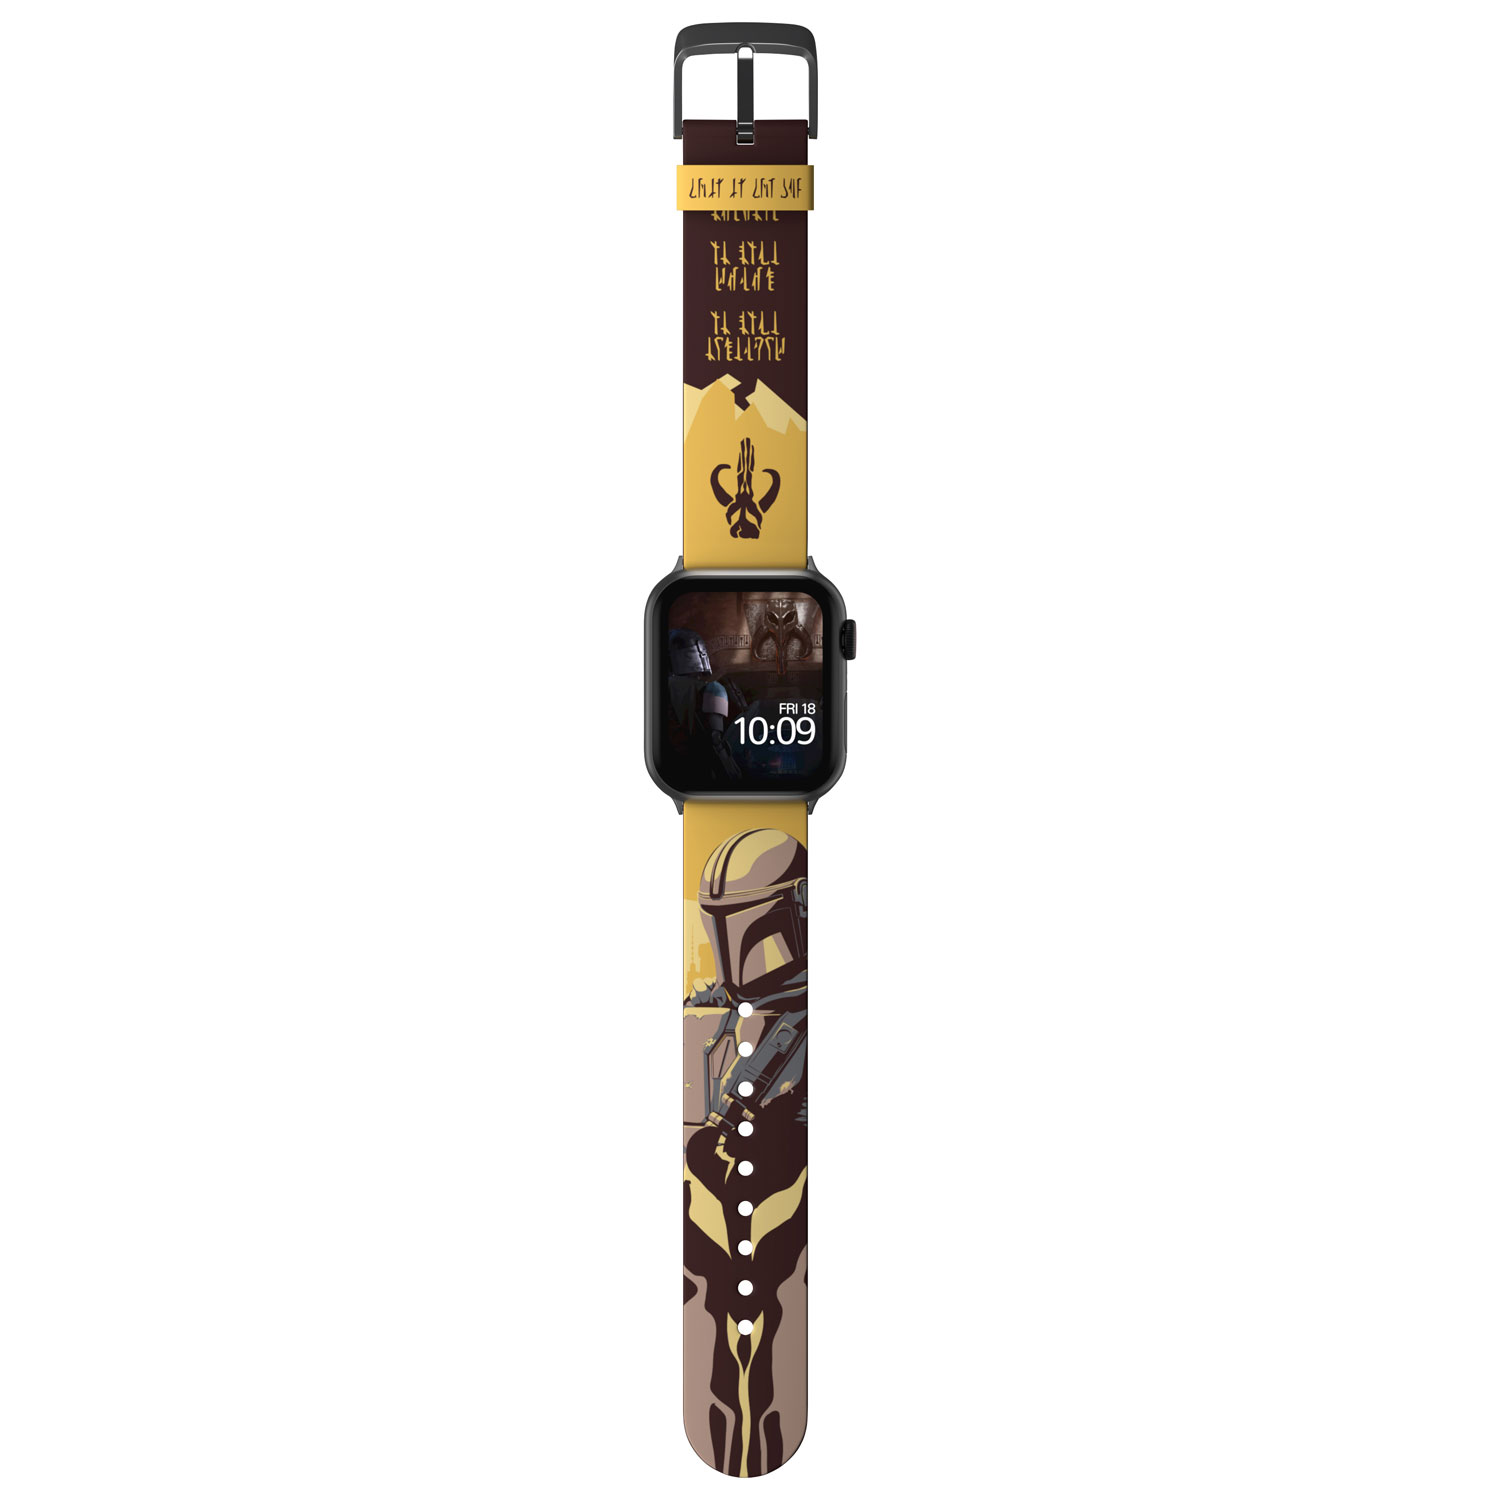 MobyFox Star Wars: The Mandalorian Silicone Band for Apple Watch - Code of Honor